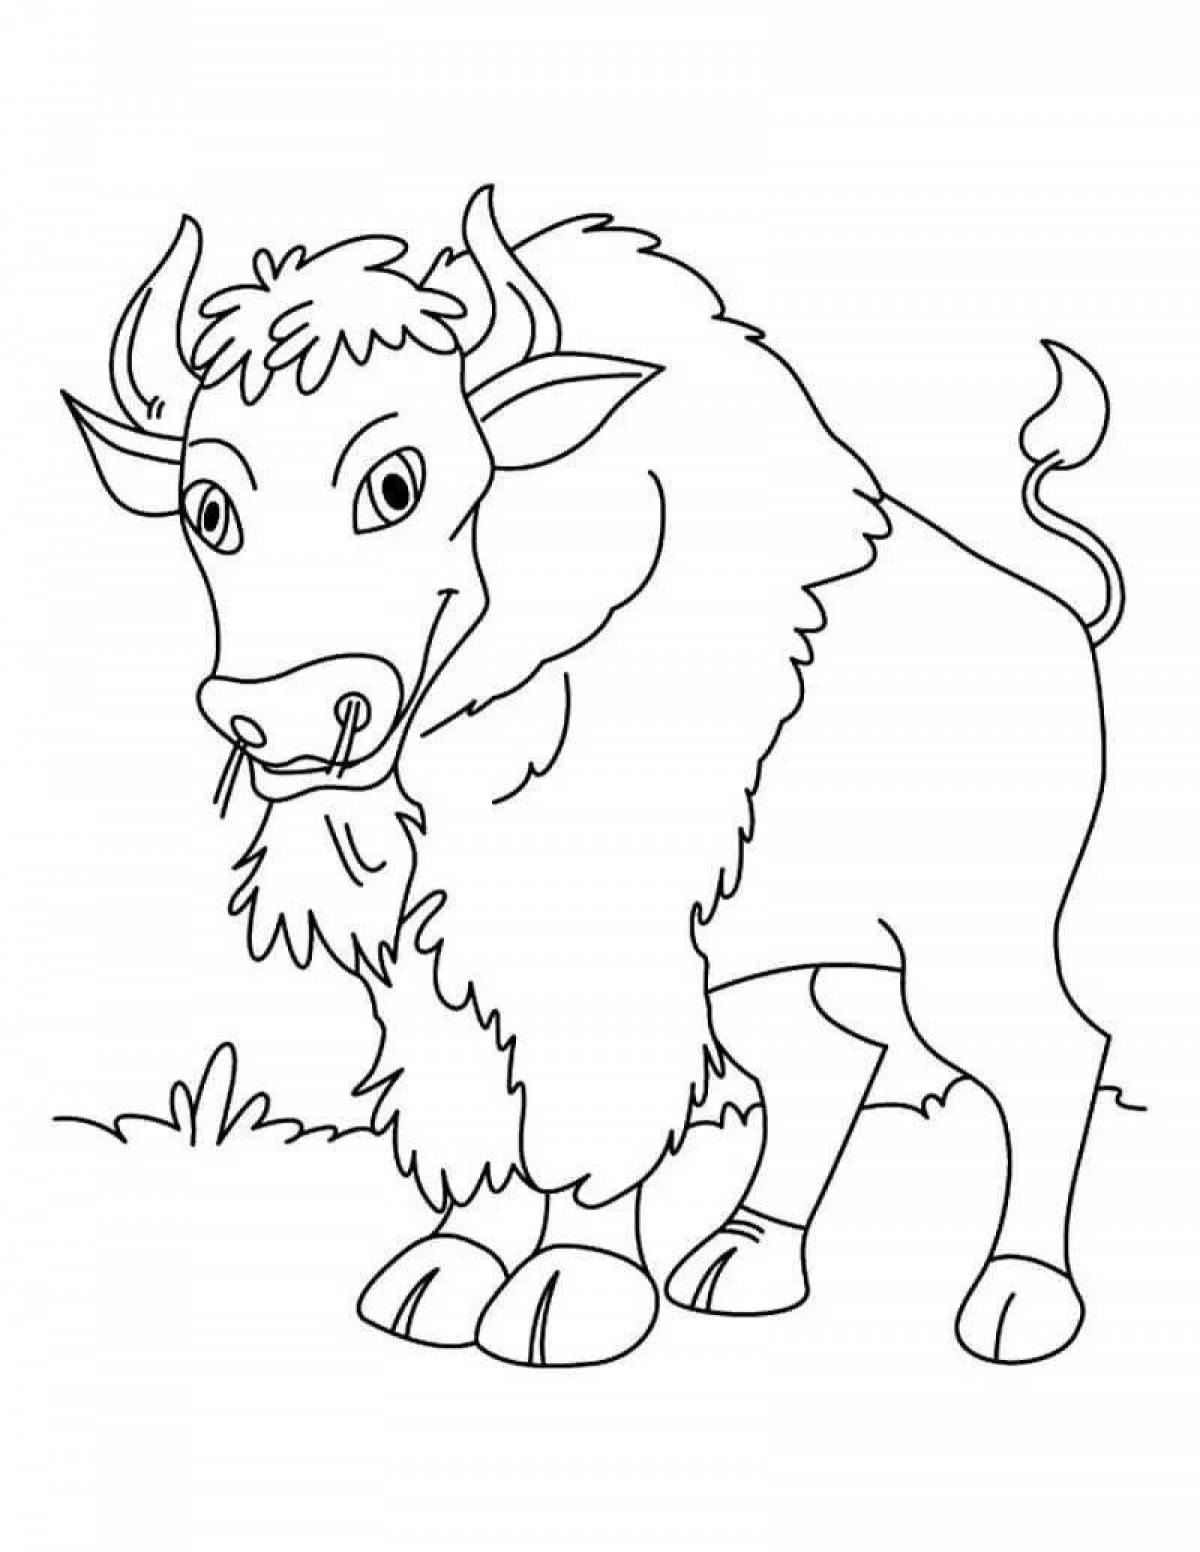 Colorful bison coloring page